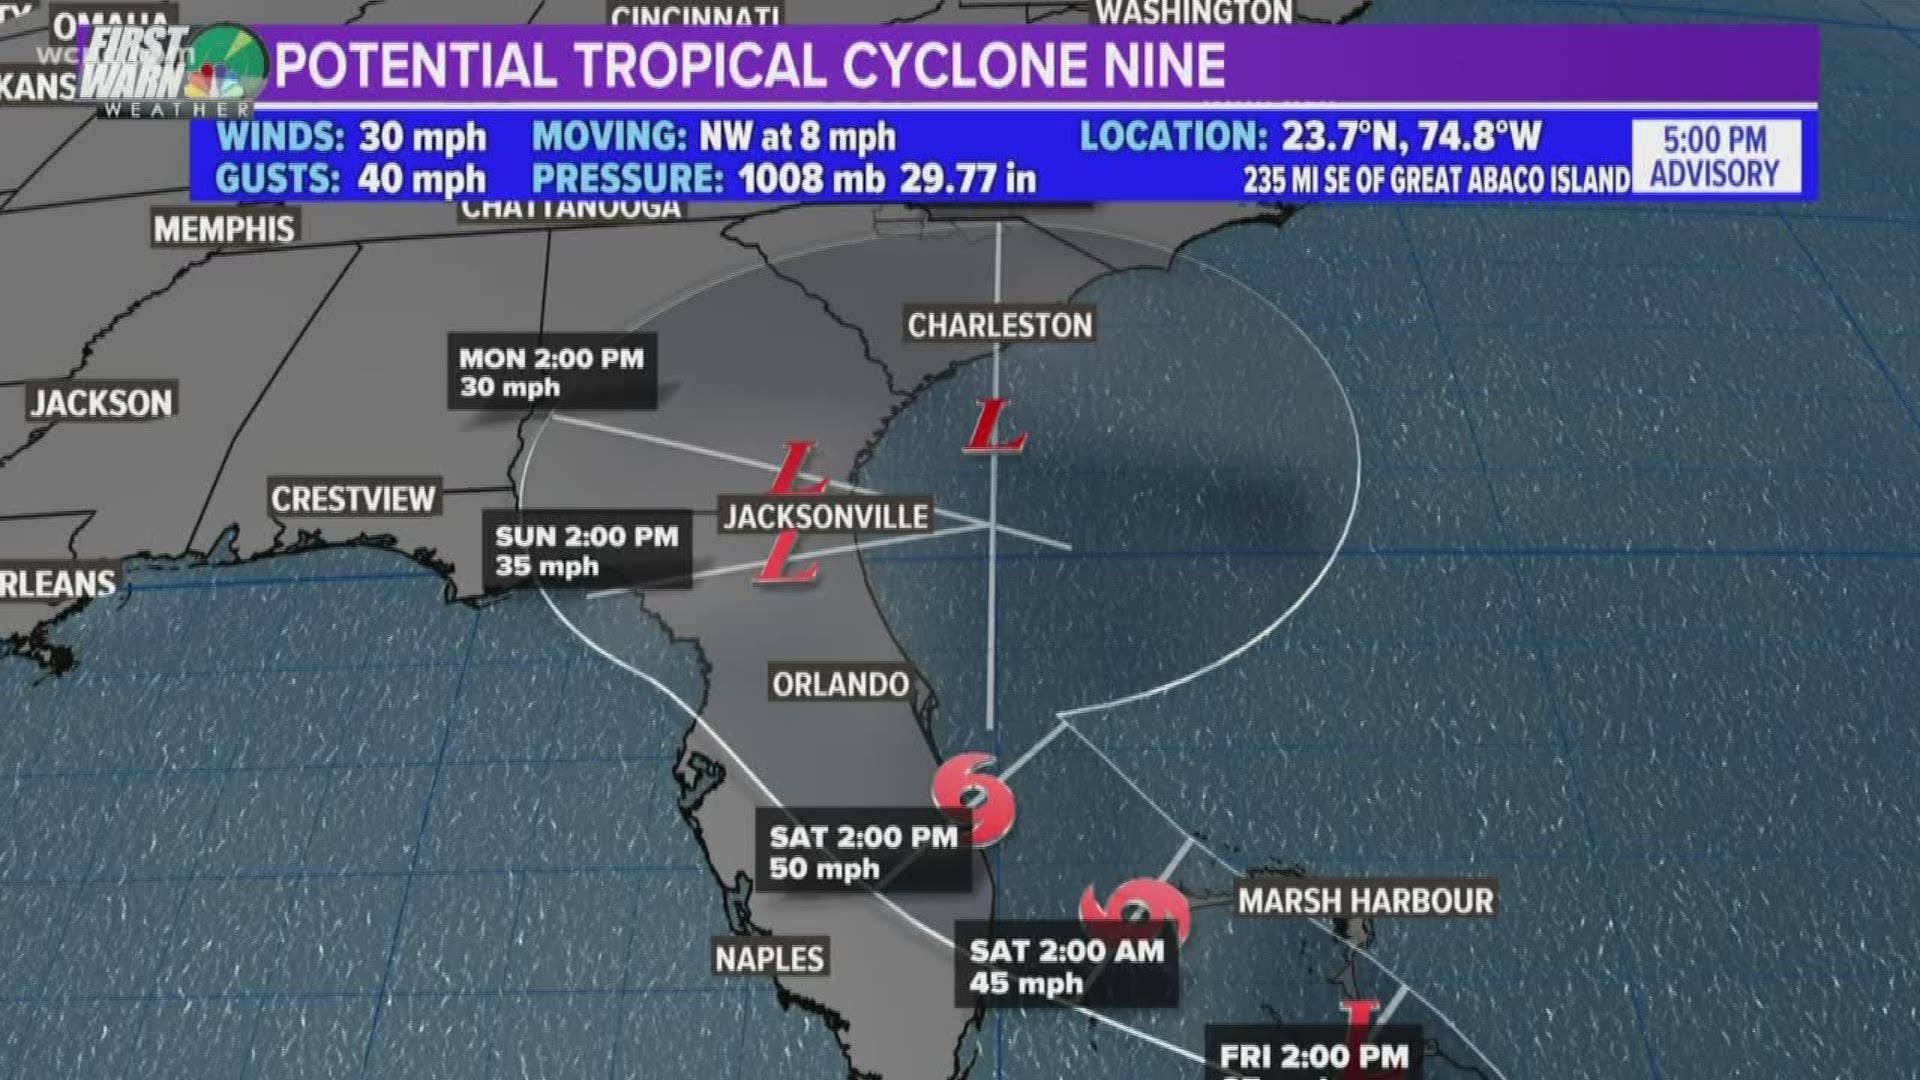 A new tropical cyclone is expected to impact the Bahamas and Florida as Tropical Storm Humberto. Much like Hurricane Dorian, this storm could move along the Southeast coast and bring impacts to Georgia and South Carolina.